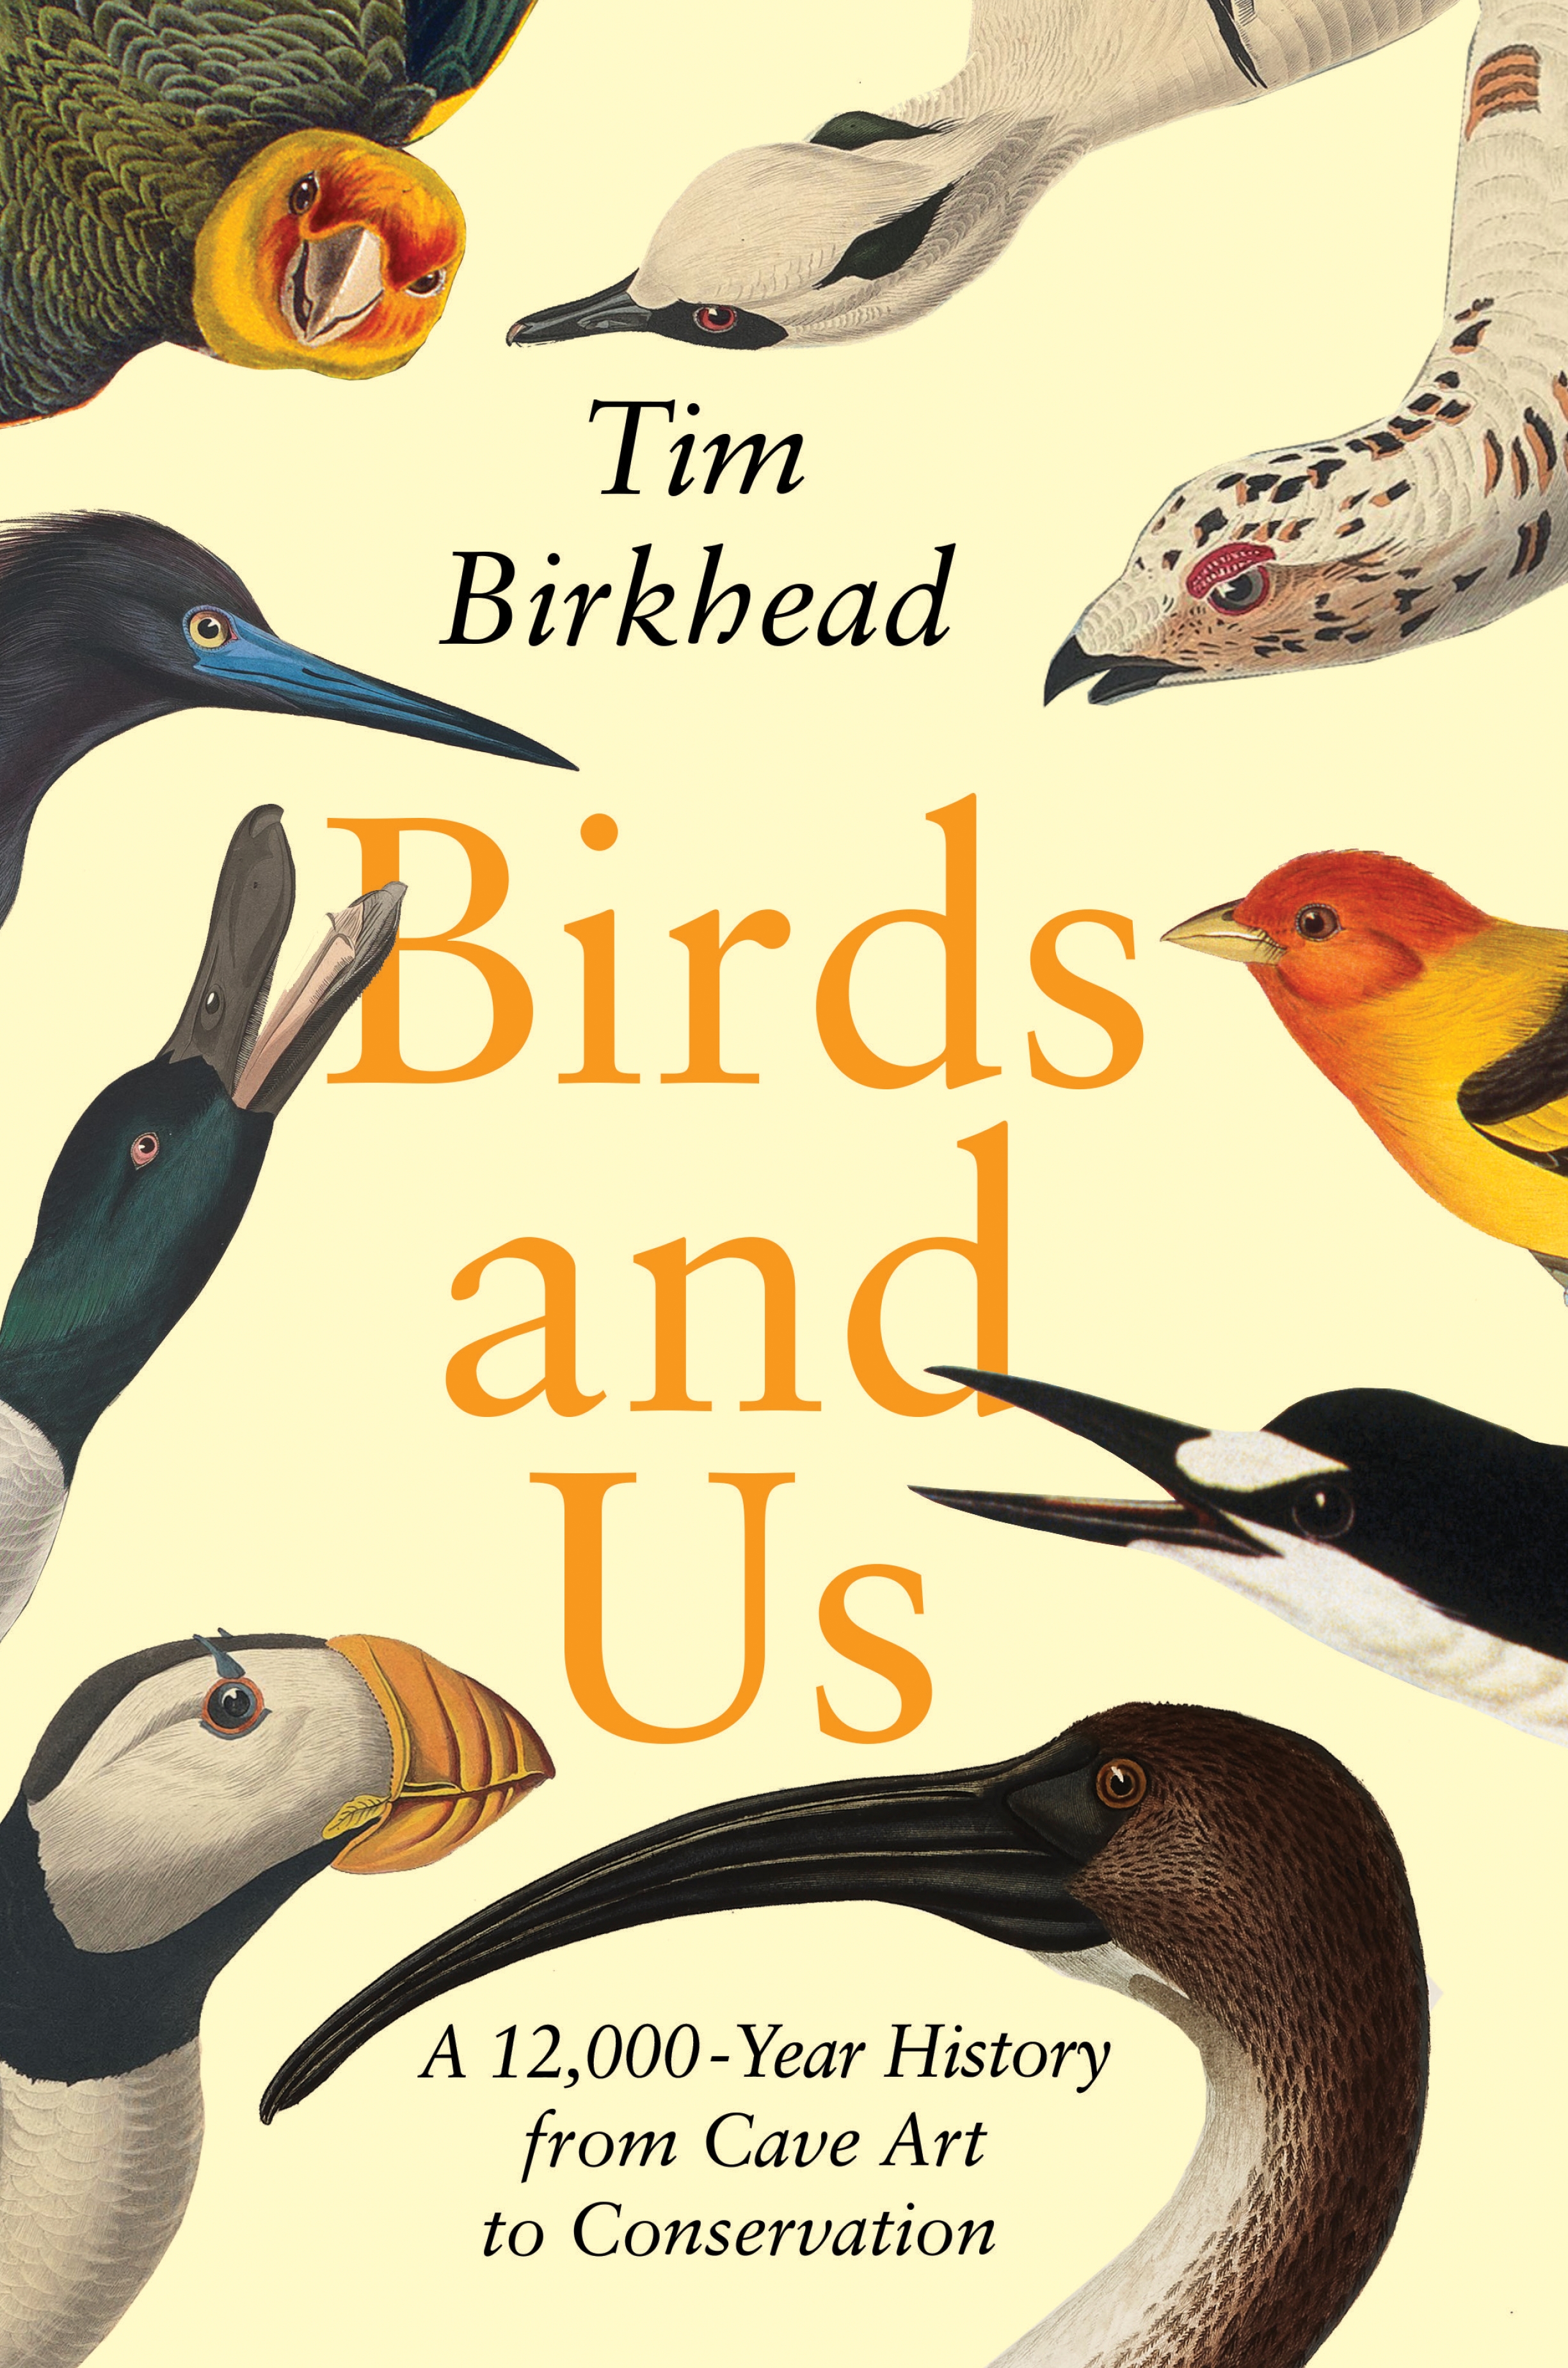 Image for "Birds and Us"